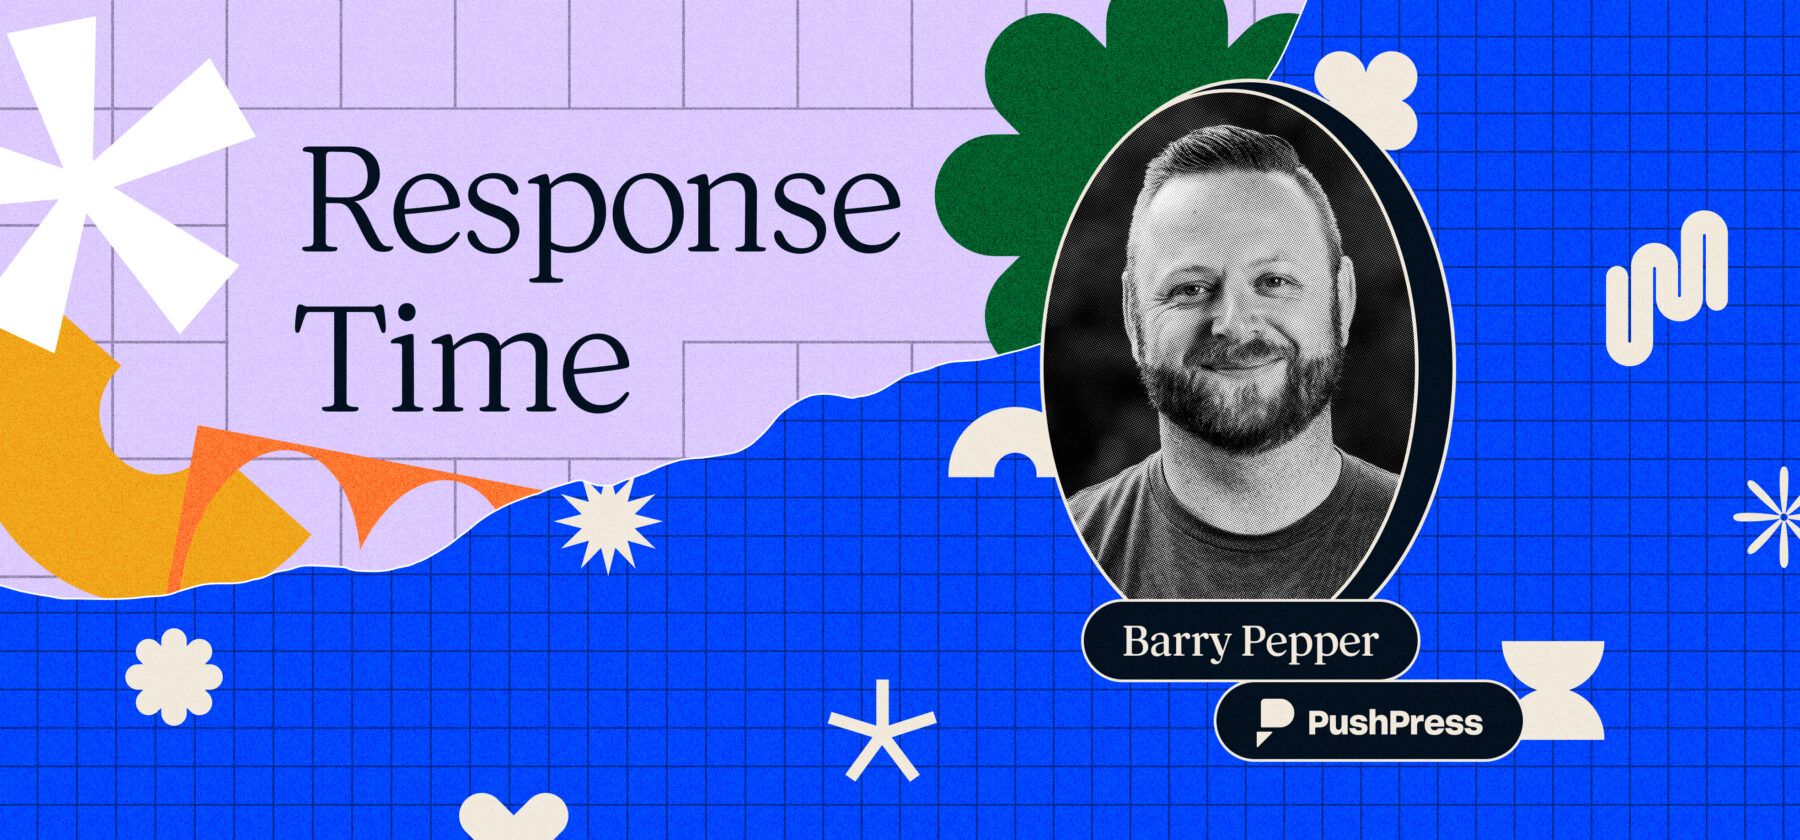 Response Time vol. 6 with Barry Pepper, VP of Customer Experience at PushPress